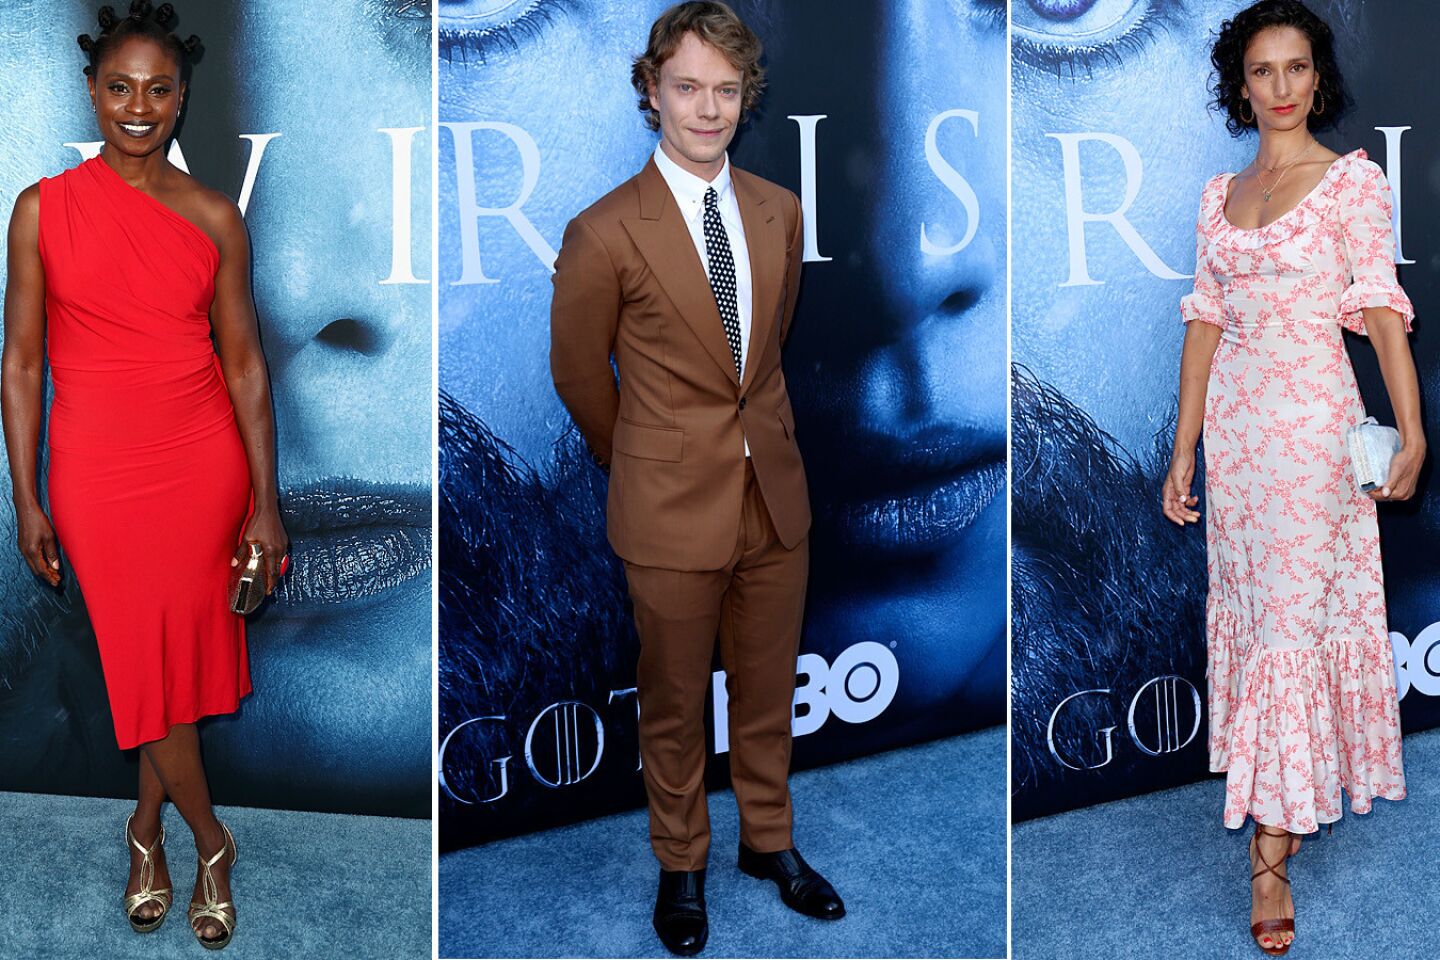 'Game of Thrones' premiere